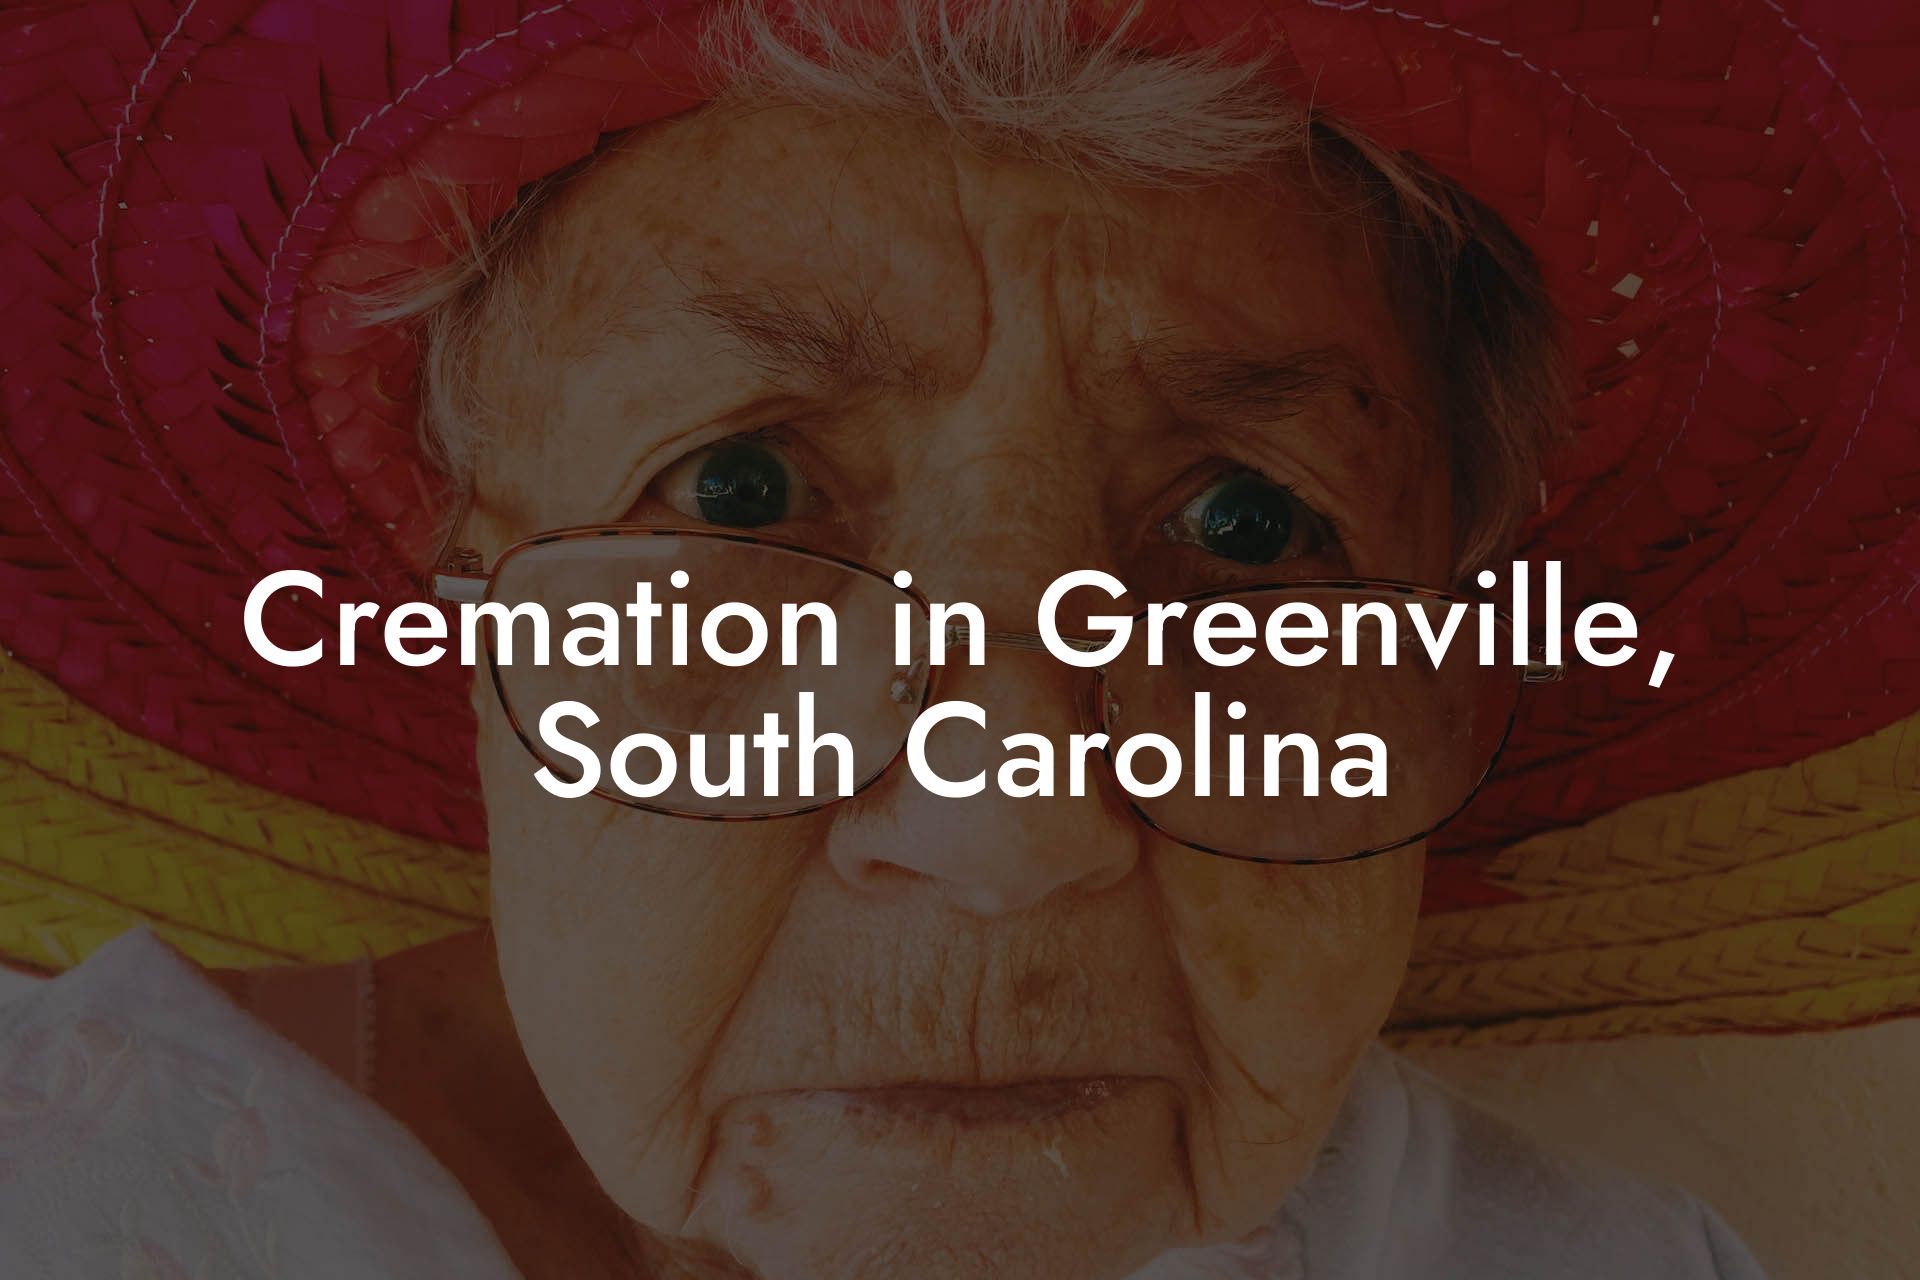 Cremation in Greenville, South Carolina